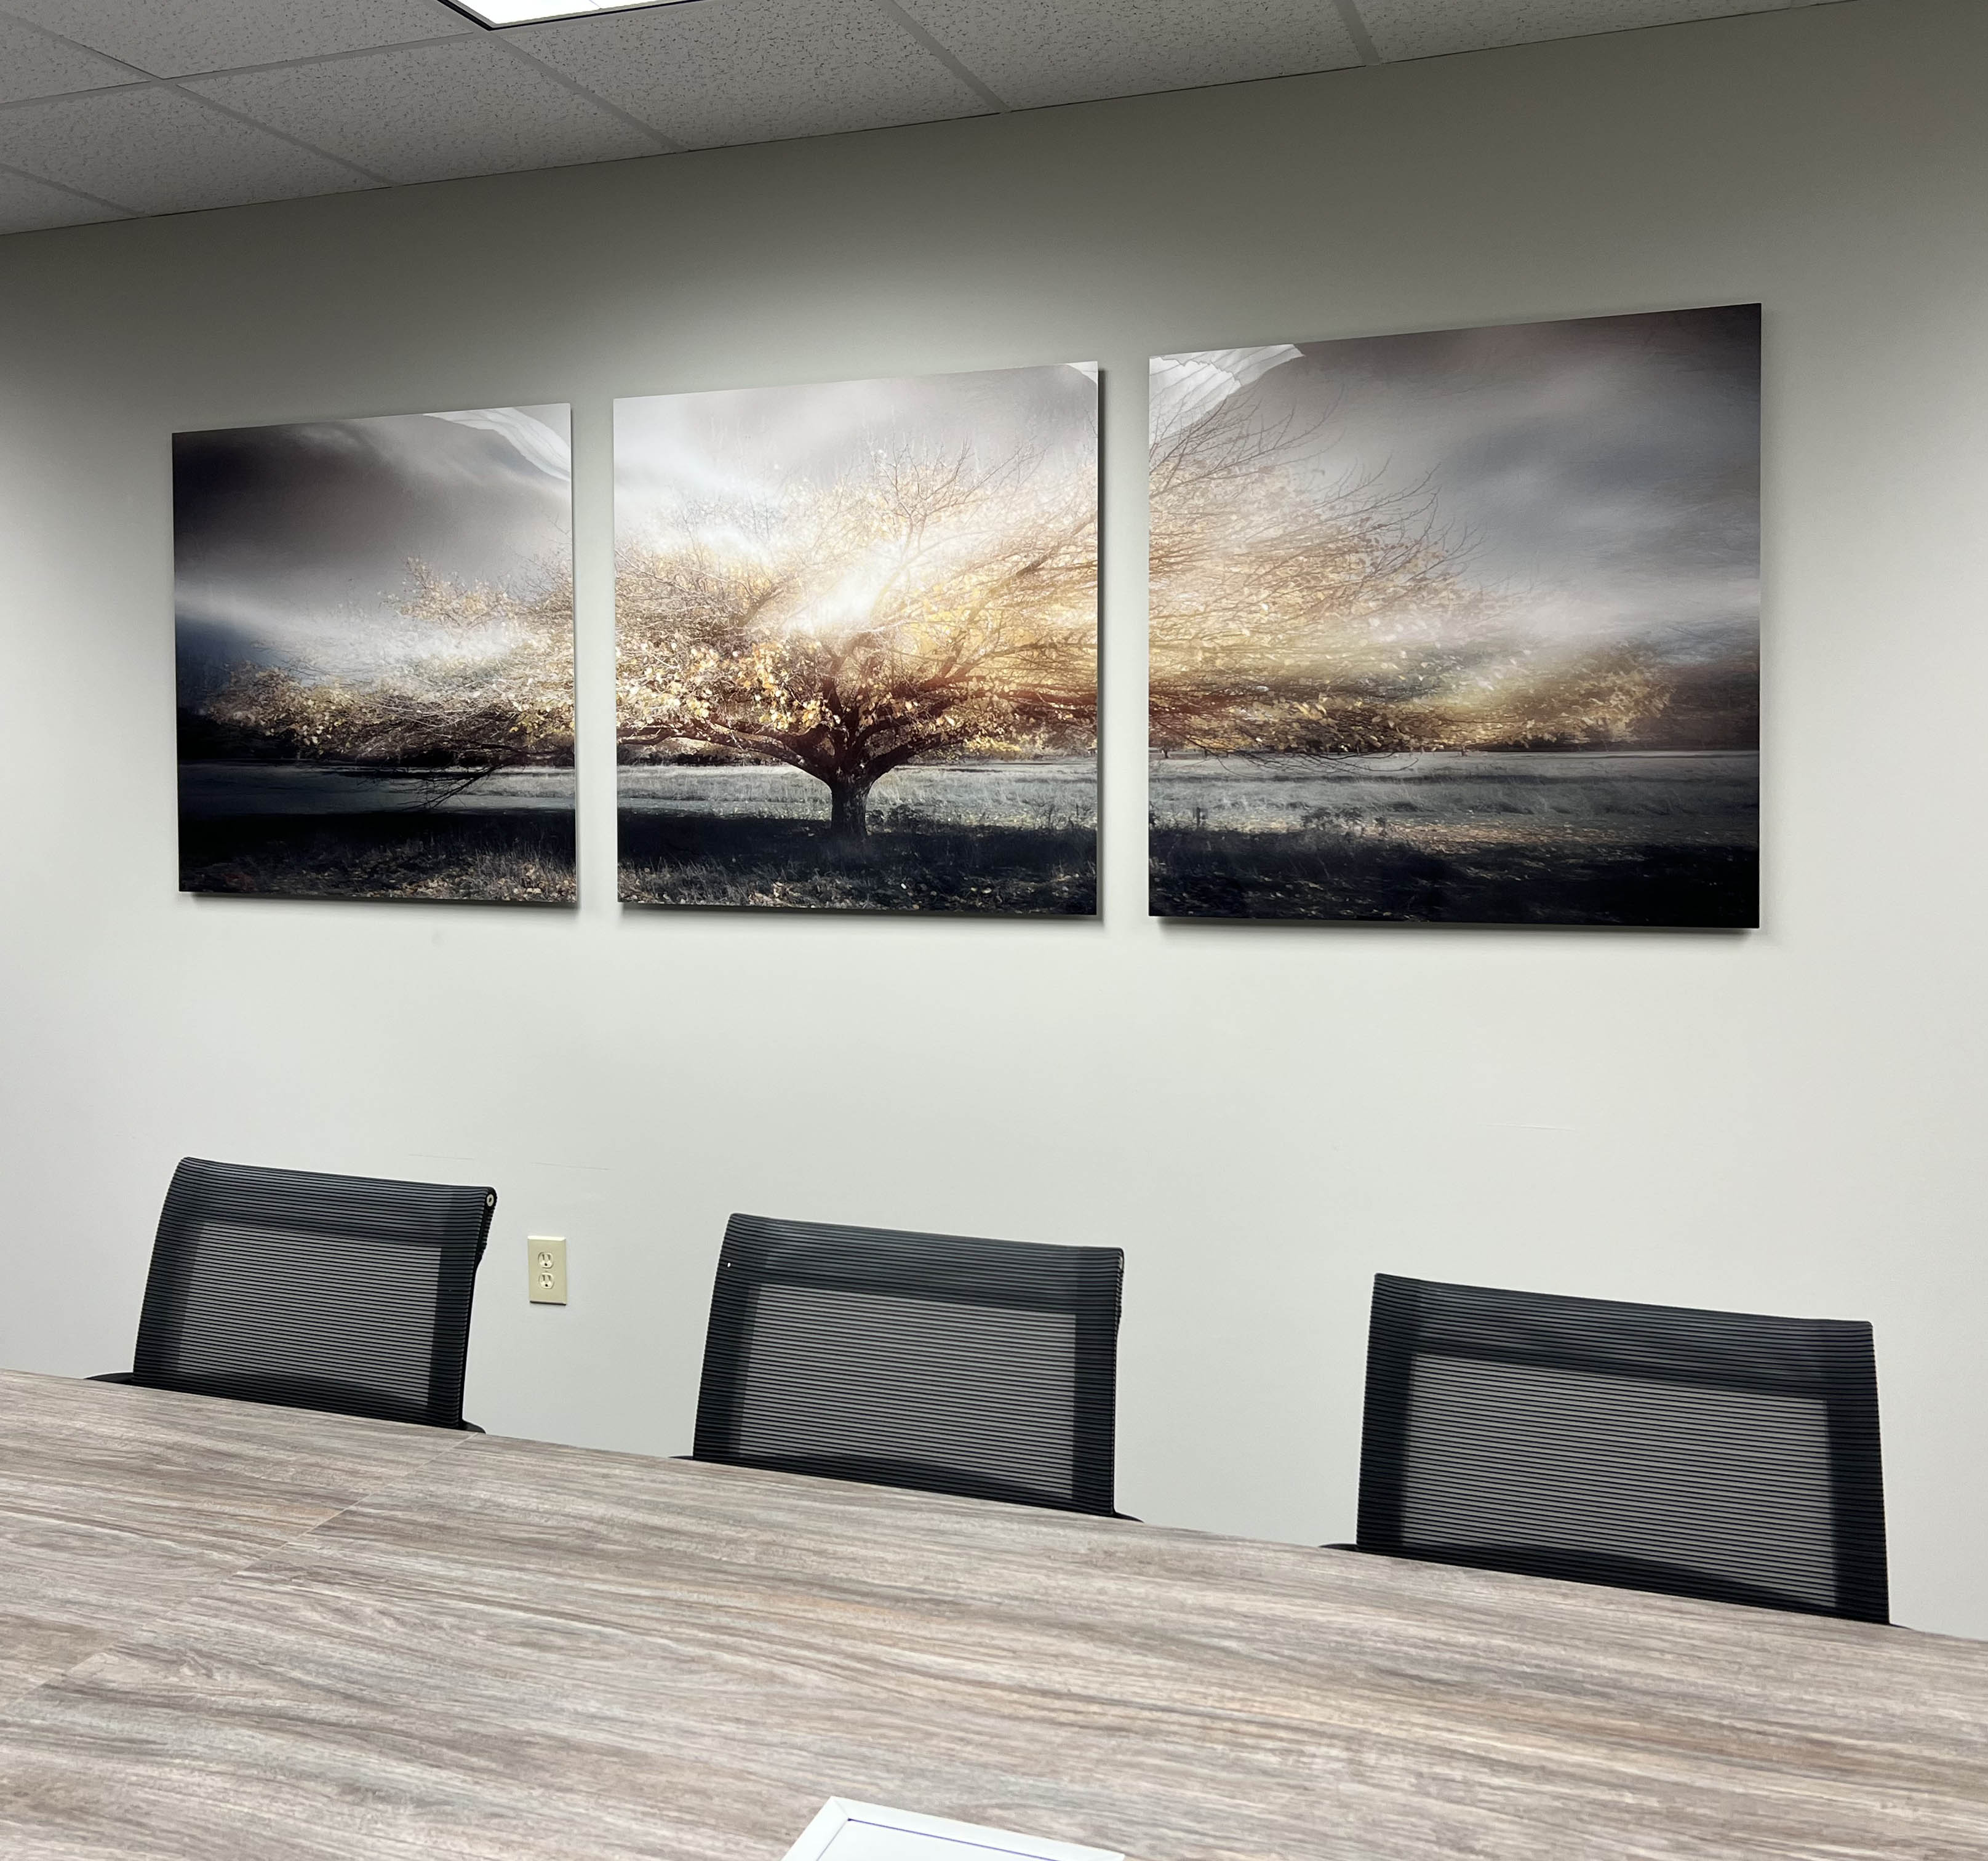 Metal finish artwork in conference room